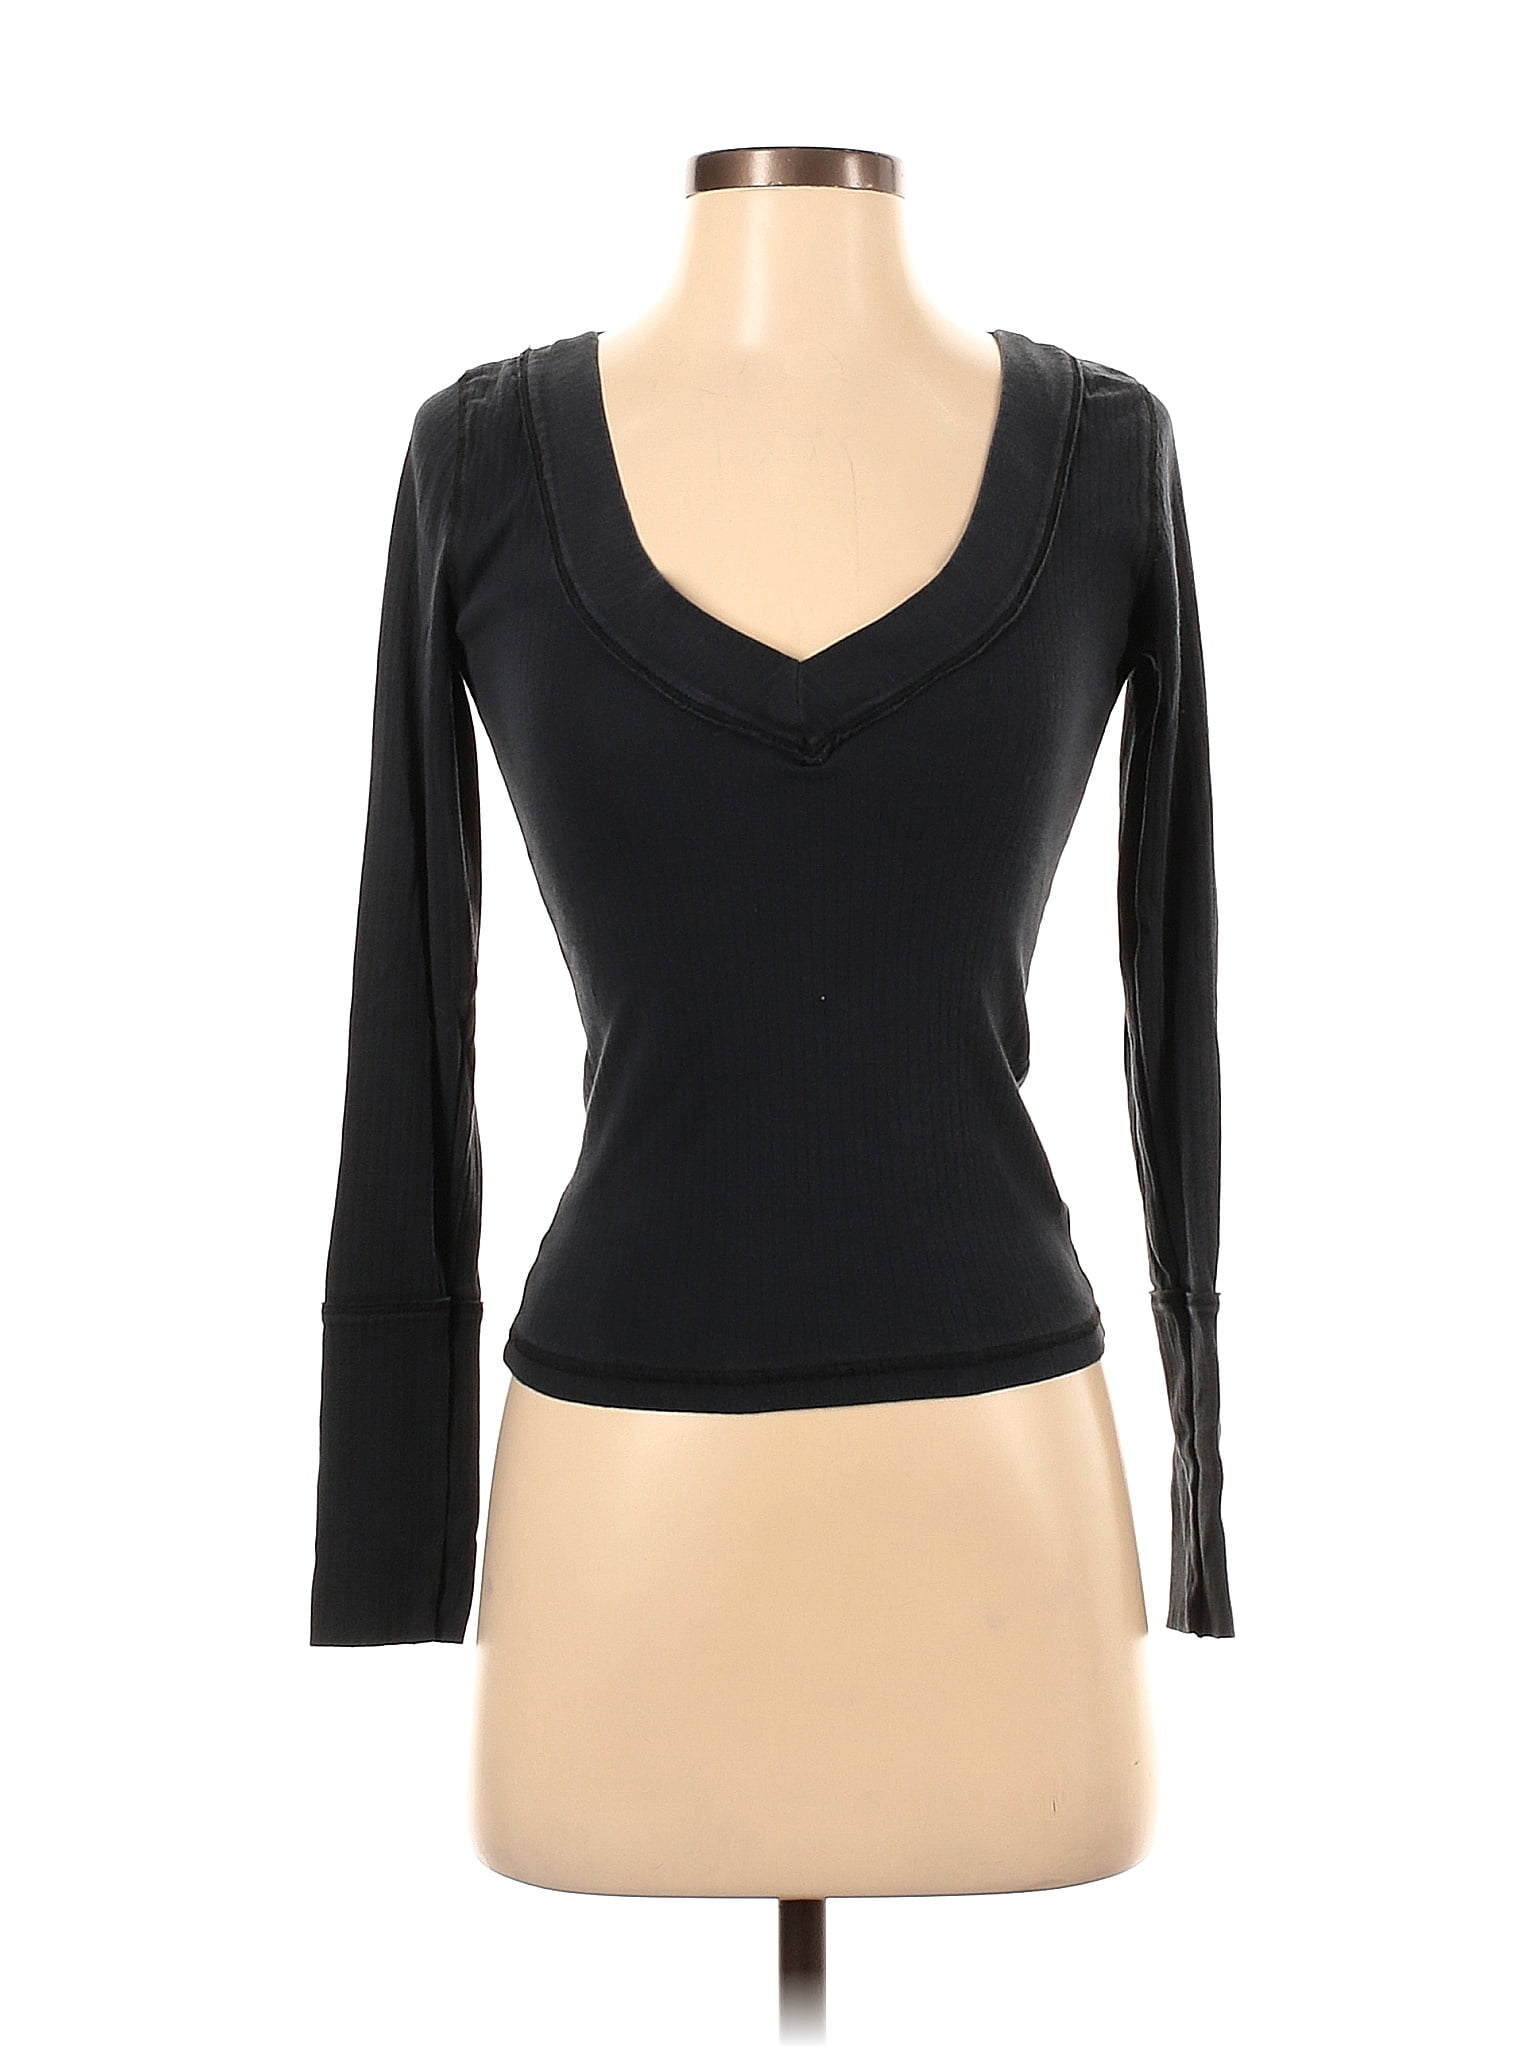 Romy Long-Sleeve Top by Intimately at Free People, Black, L